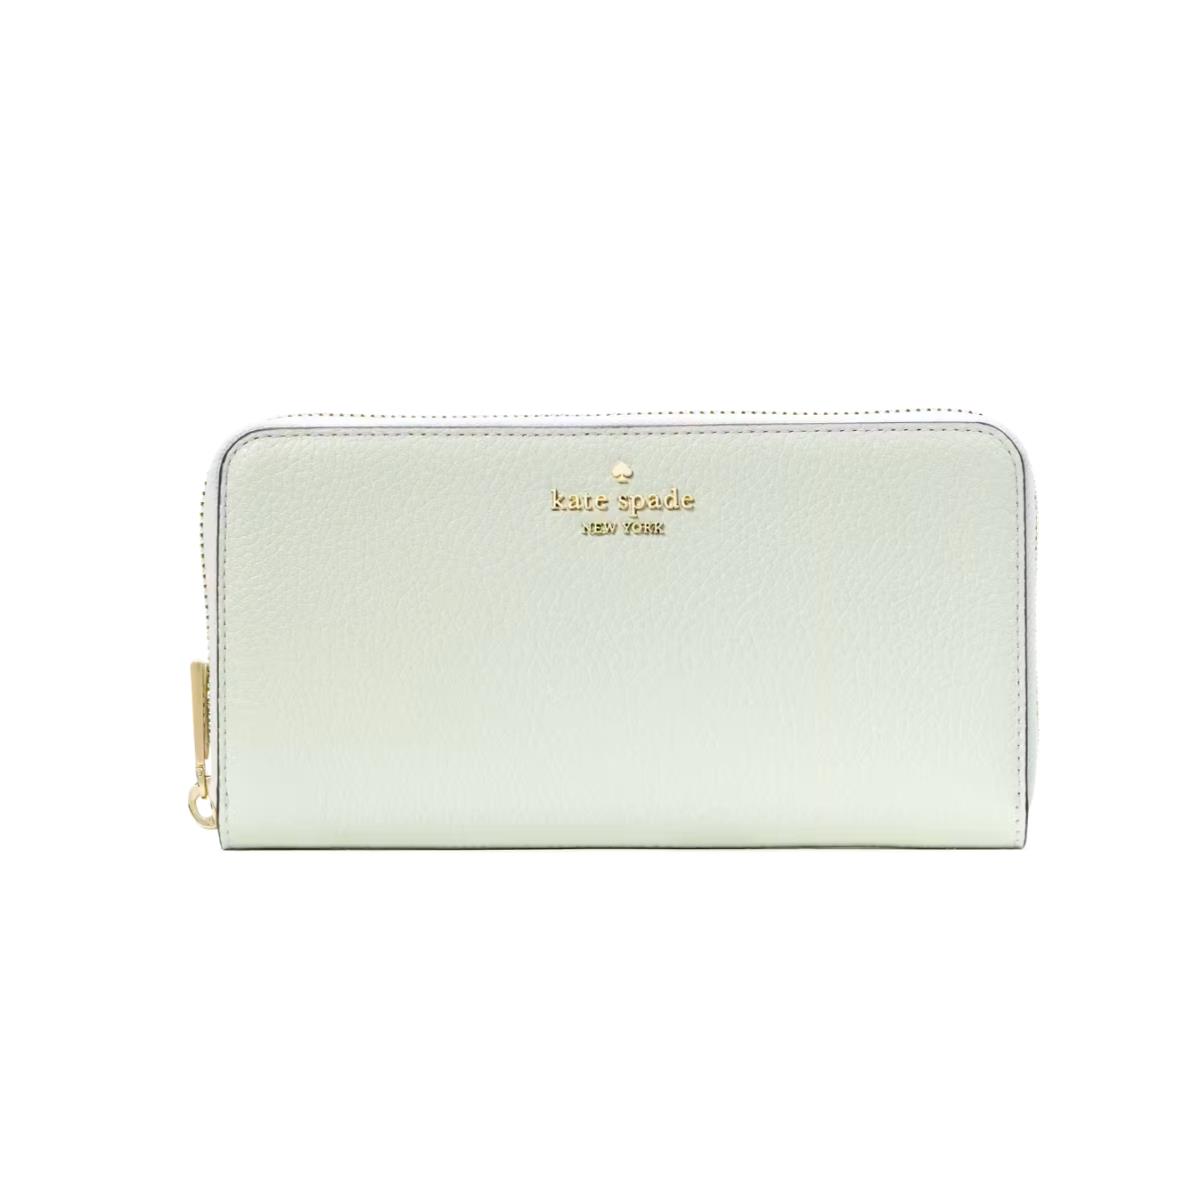 New Kate Spade Leila Large Continental Wallet Pebble Leather Lime Sherbert